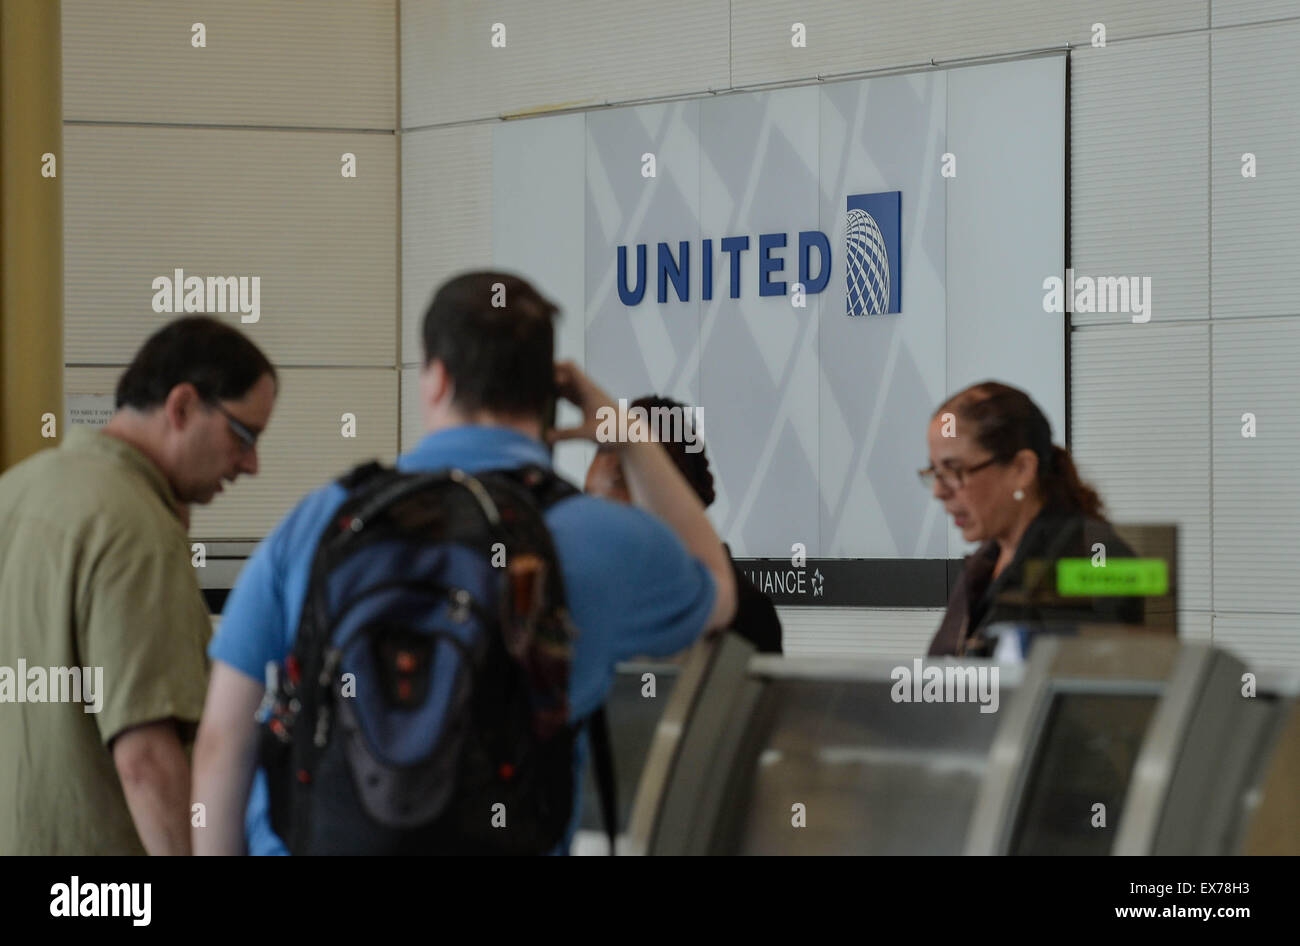 Washington, DC, USA. 8th July, 2015. People check in baggages with United Airlines at Ronald Reagan Washington National Airport in Washington, DC, the United States, on July 8, 2015. United Airlines (UA) resumed flights at all airports that had been grounded Wednesday morning for about two hours due to a computer glitch, according to the U.S. Federal Aviation Administration (FAA). Credit:  Bao Dandan/Xinhua/Alamy Live News Stock Photo